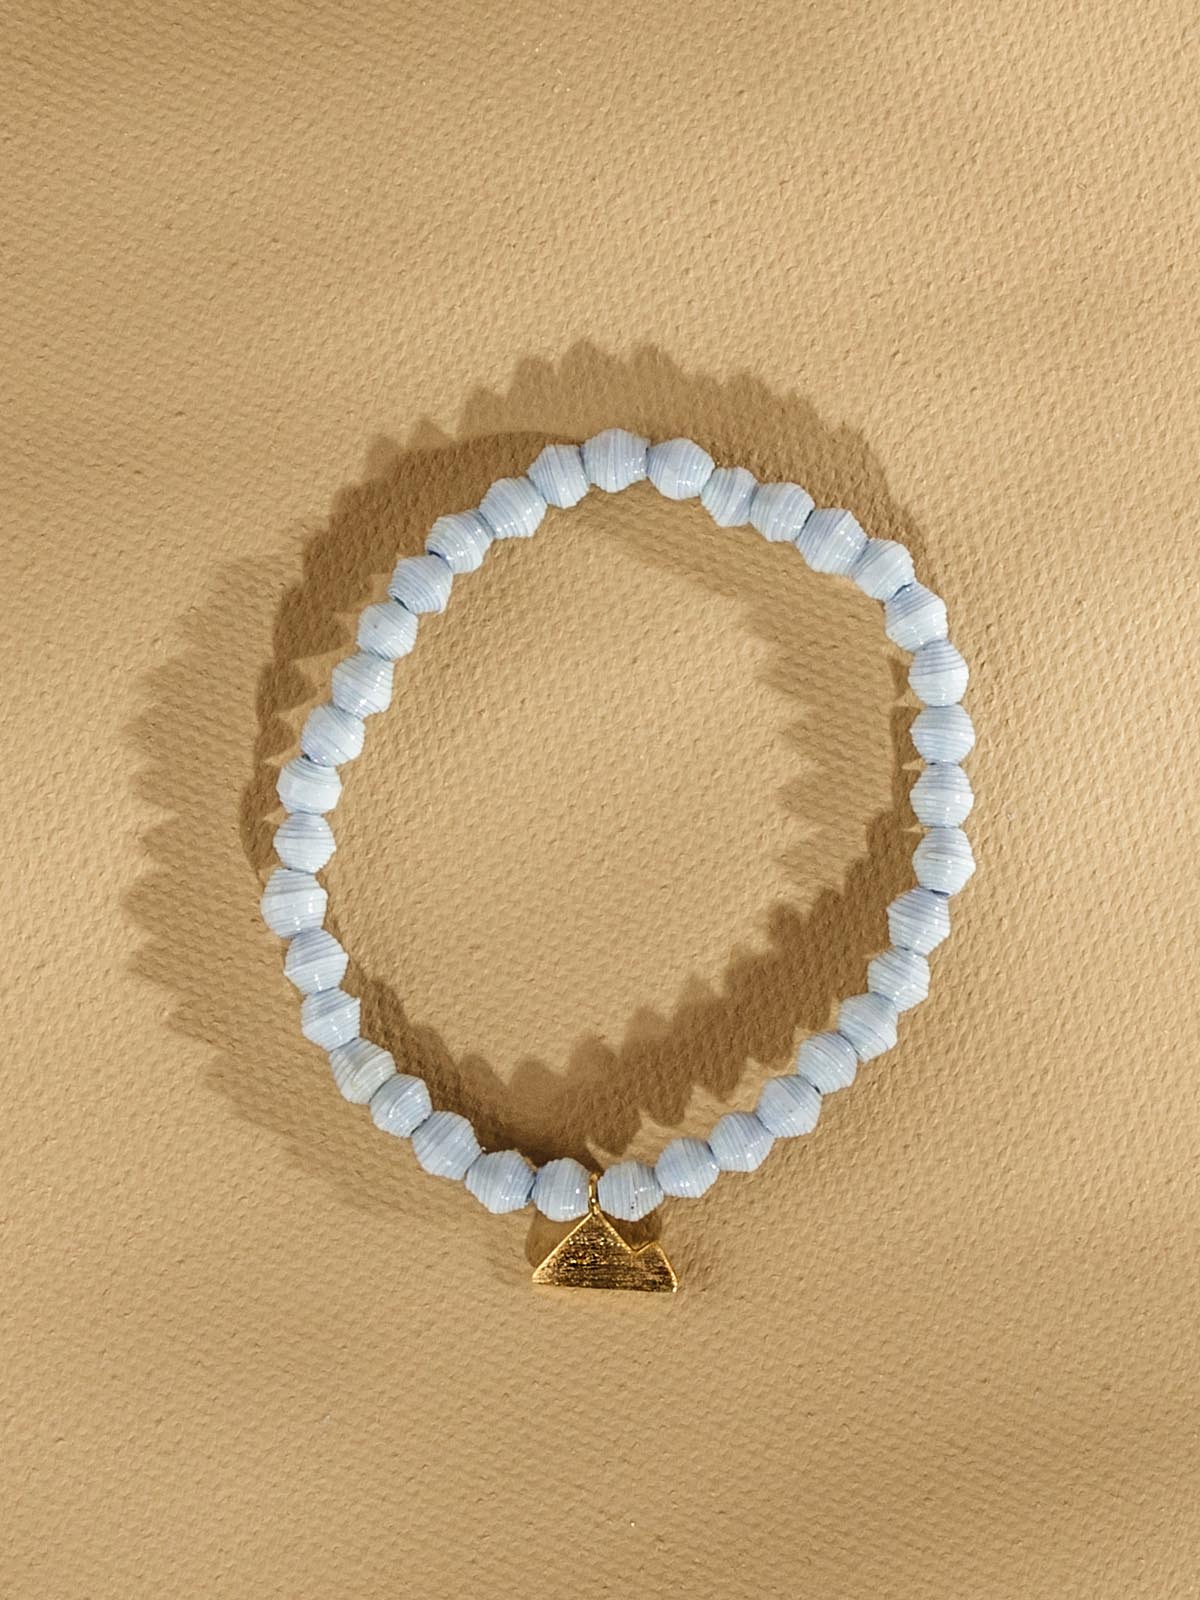 Pale blue beaded bracelet with golden mountain charm. Bracelet is placed on a tan background.